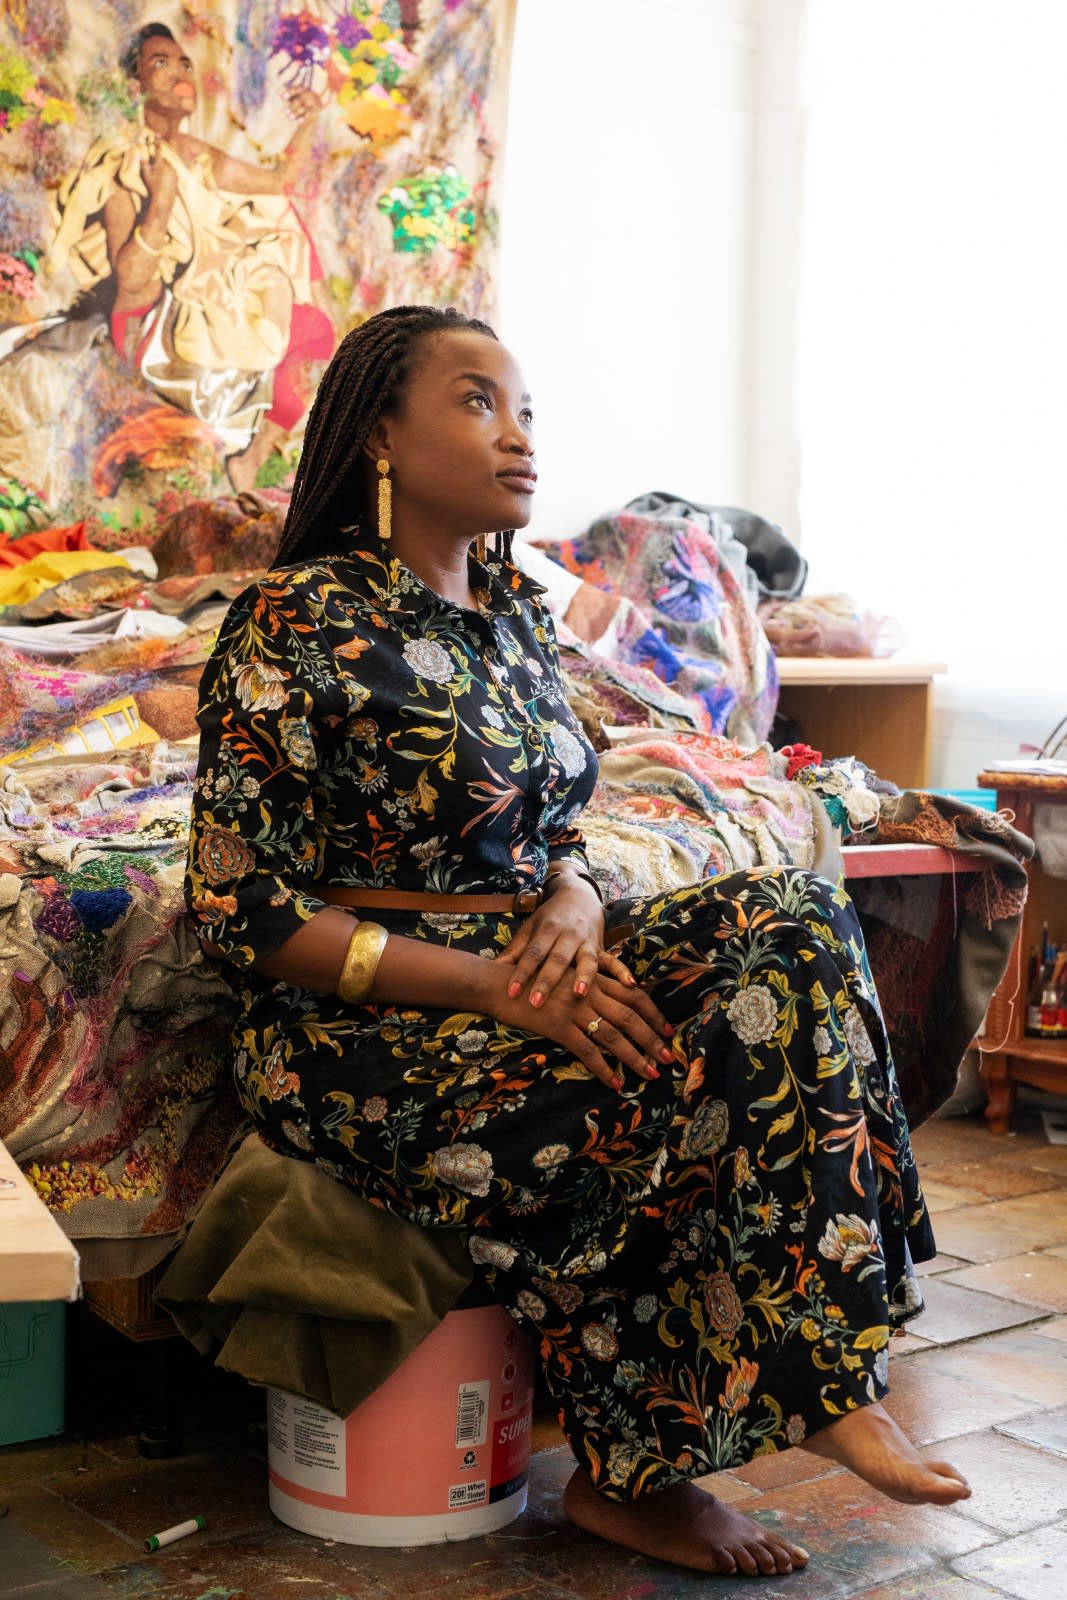 Kimathi Mafafo photographed in her studio by by Michelle McCann, 2021.